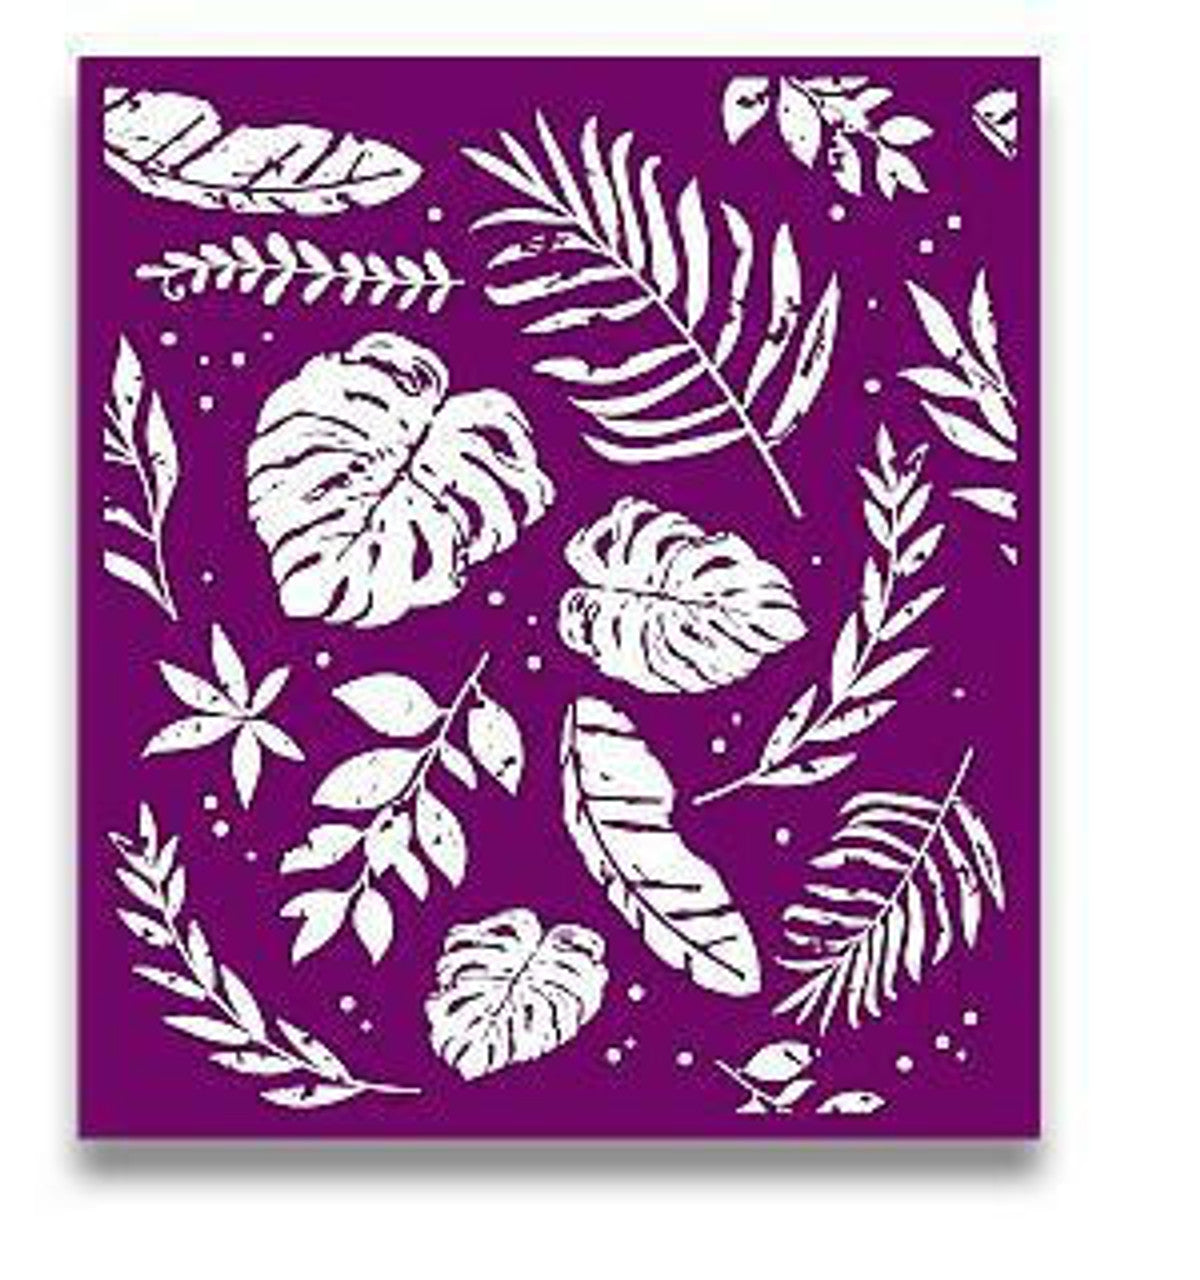 BOTANICAL Silk Screen Stencils 3 designs 8" x 10" by Belles and Whistles